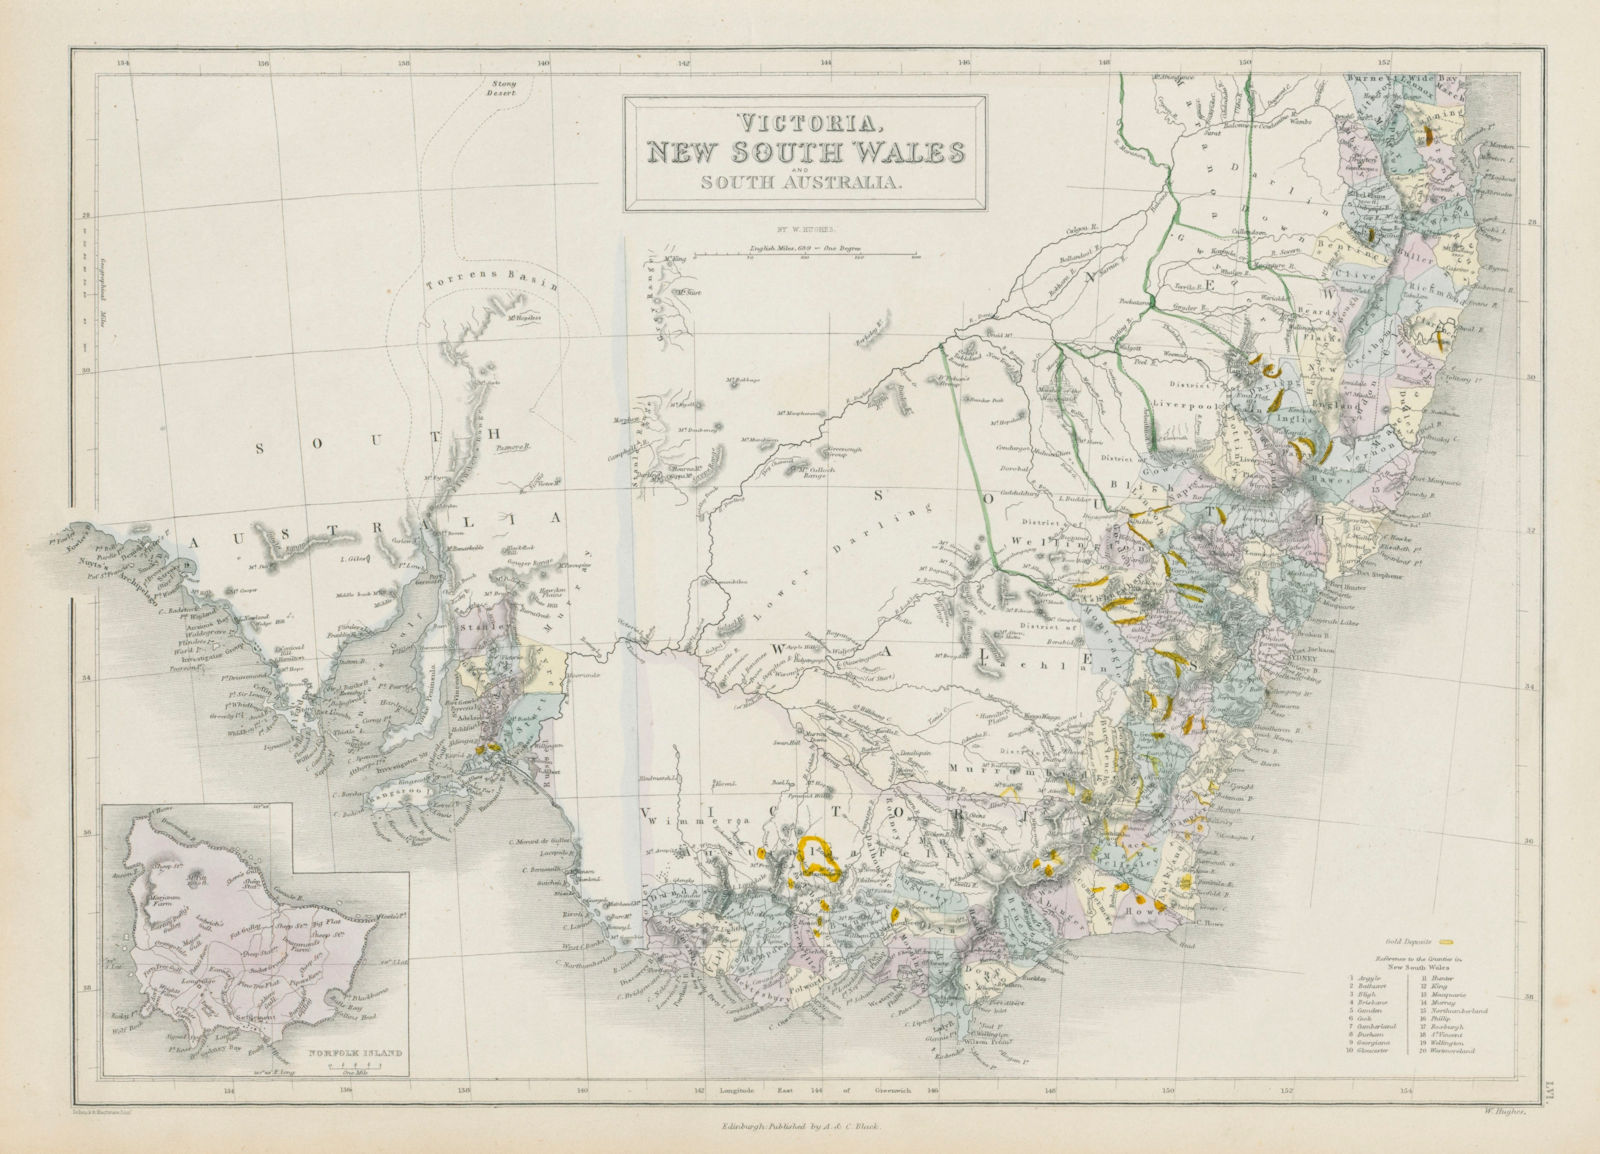 Victoria, New South Wales & South Australia Goldfields. Norfolk Island 1856 map